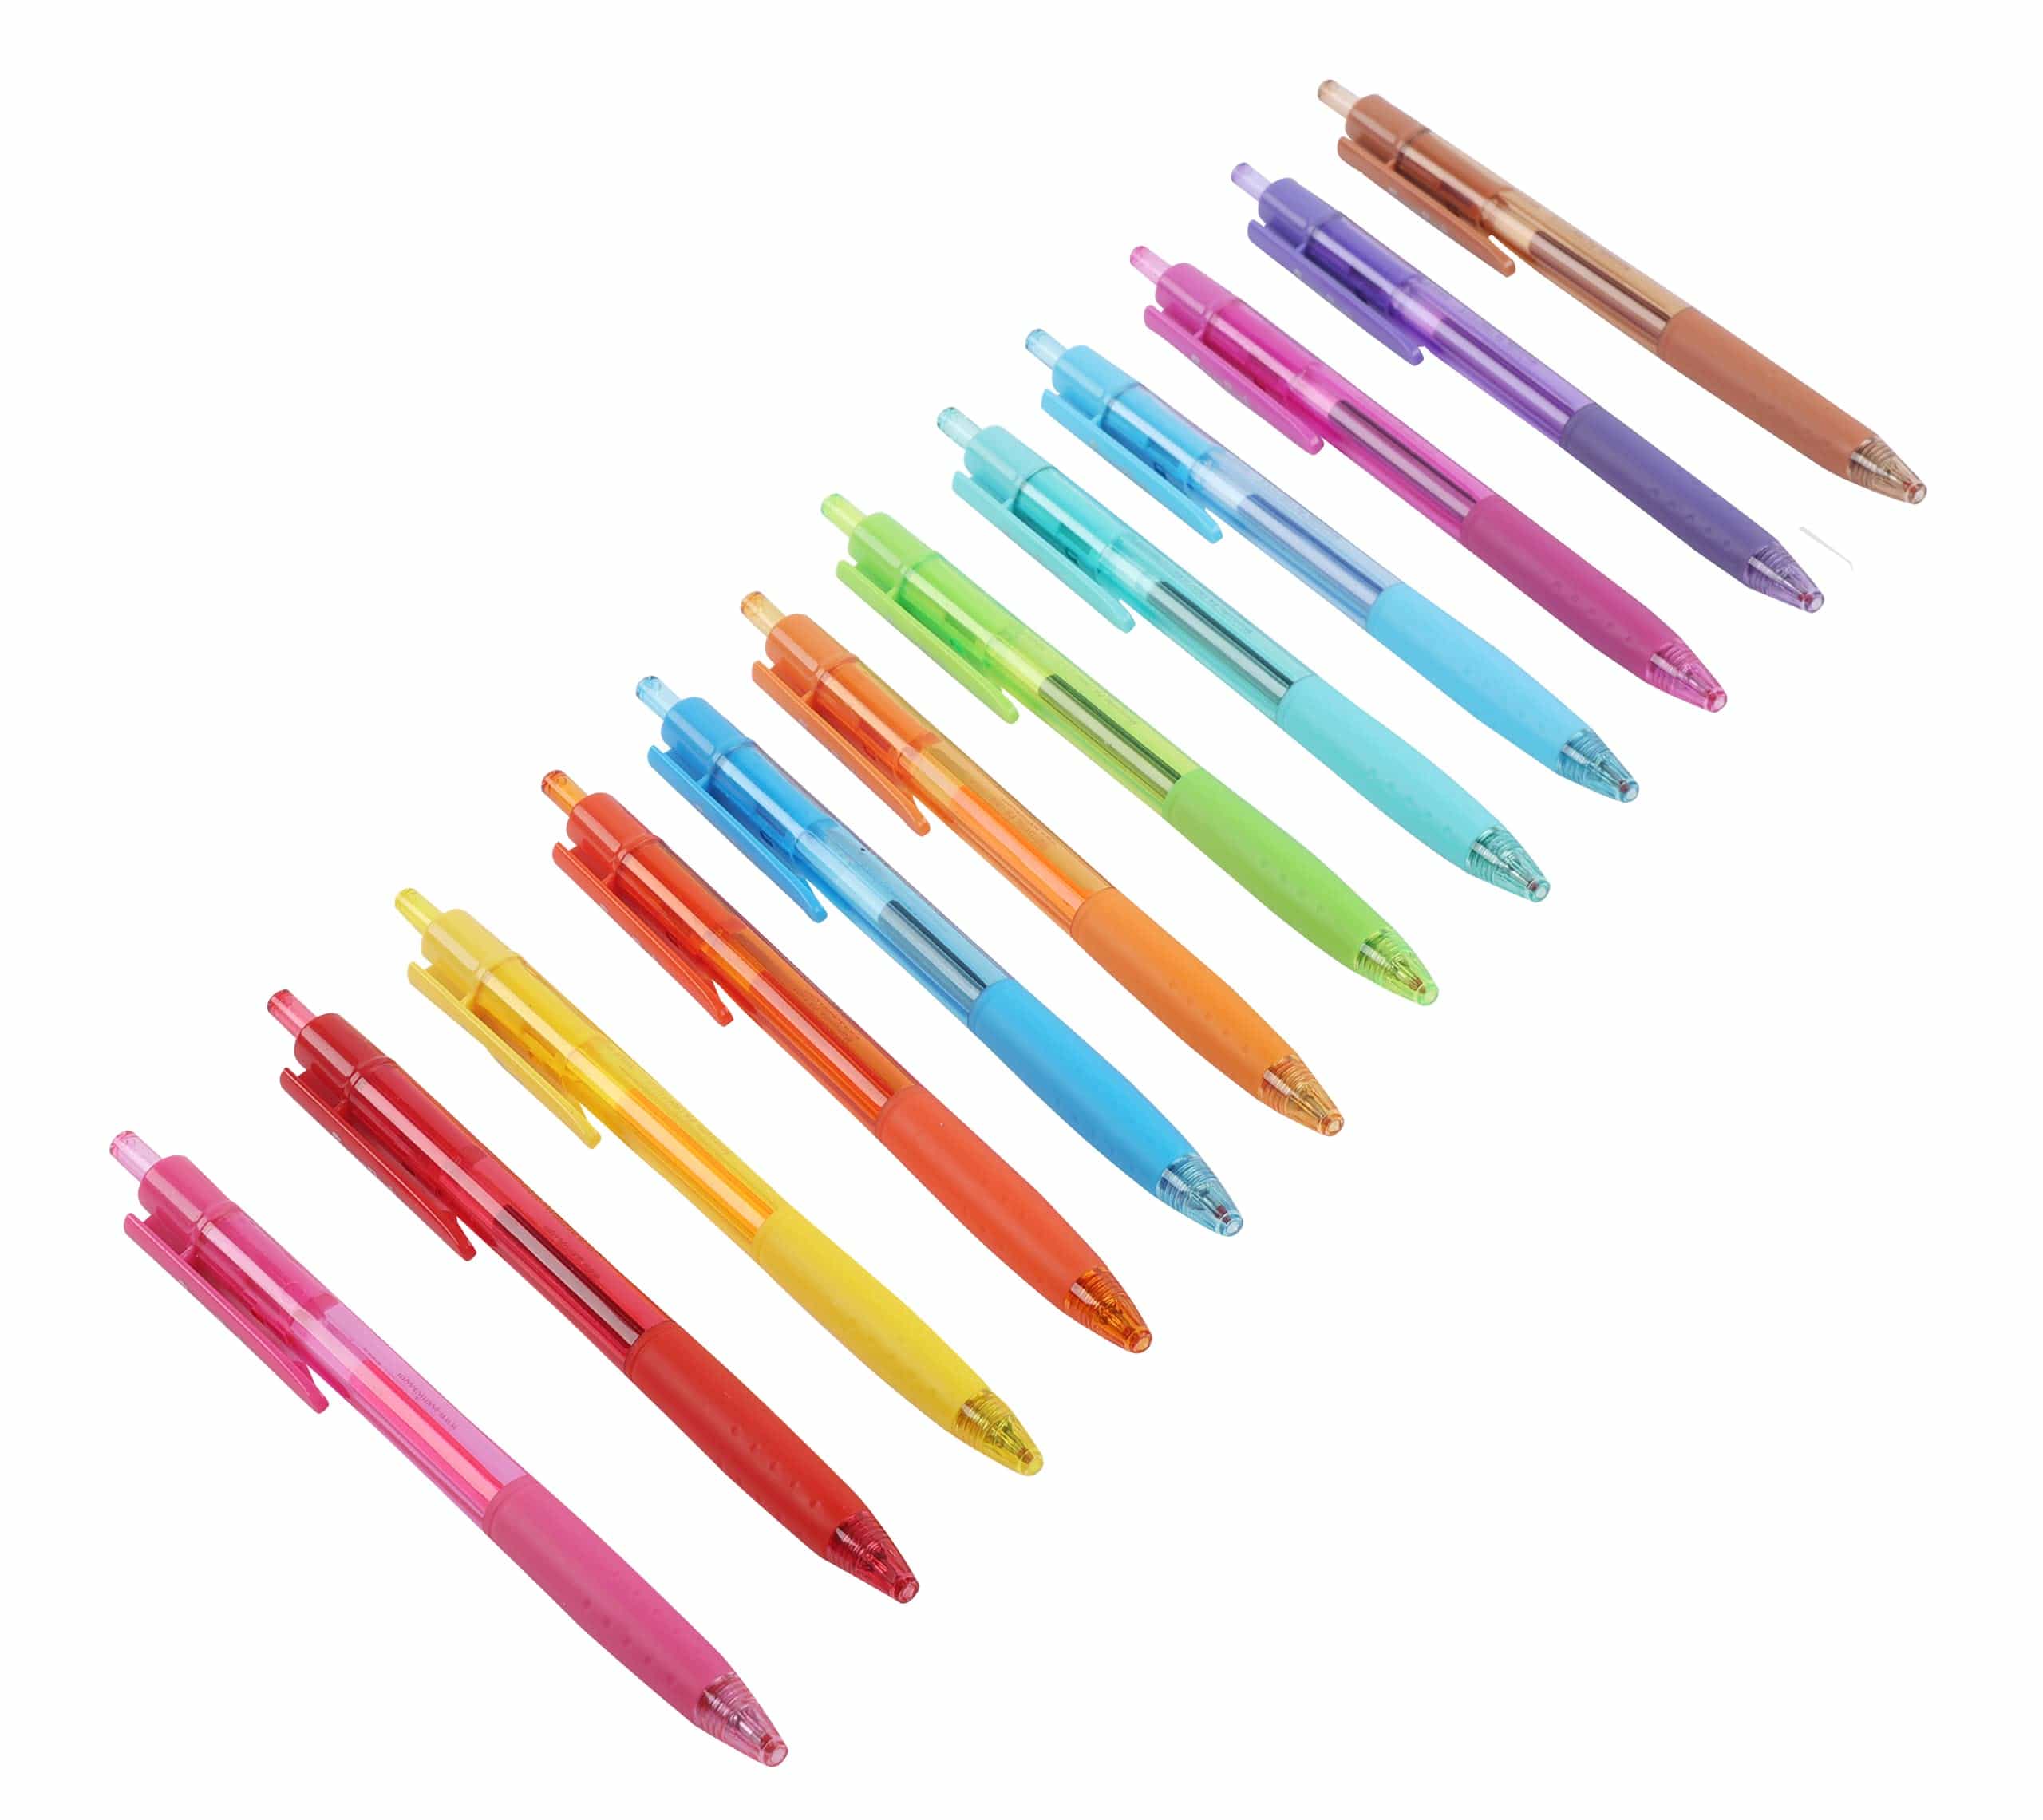 The Pen Showcase Pens For Journaling, Gel Pens, Markers and Liquid Ink Pens  Assorted Colors Total of 12 Pens Bundle, Orange, Red Blue, Yellow, Black